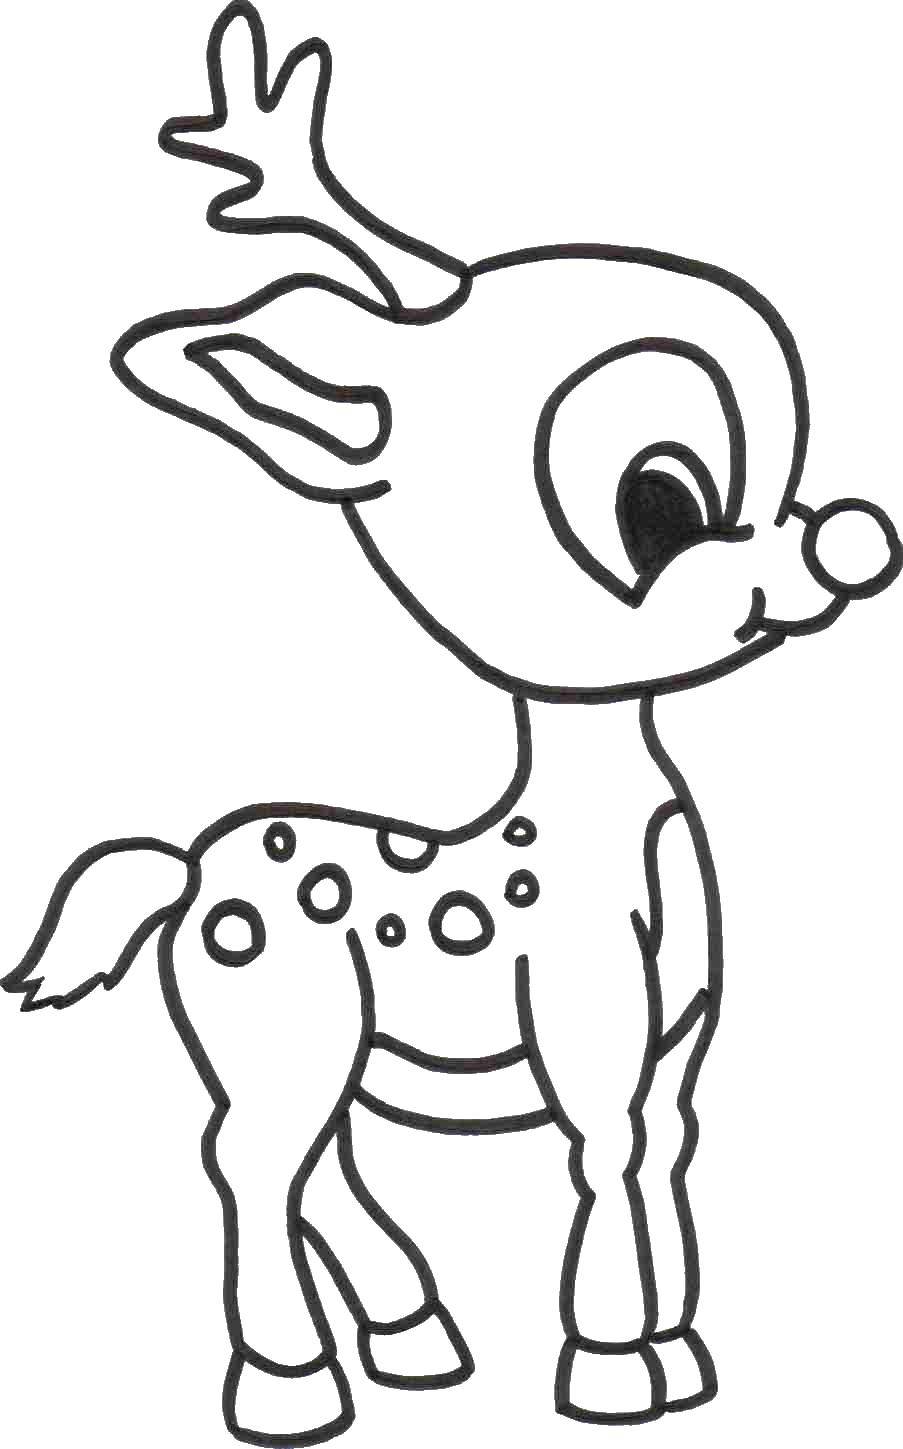 Coloring Fawn. Category Christmas. Tags:  Christmas, deer, New year.